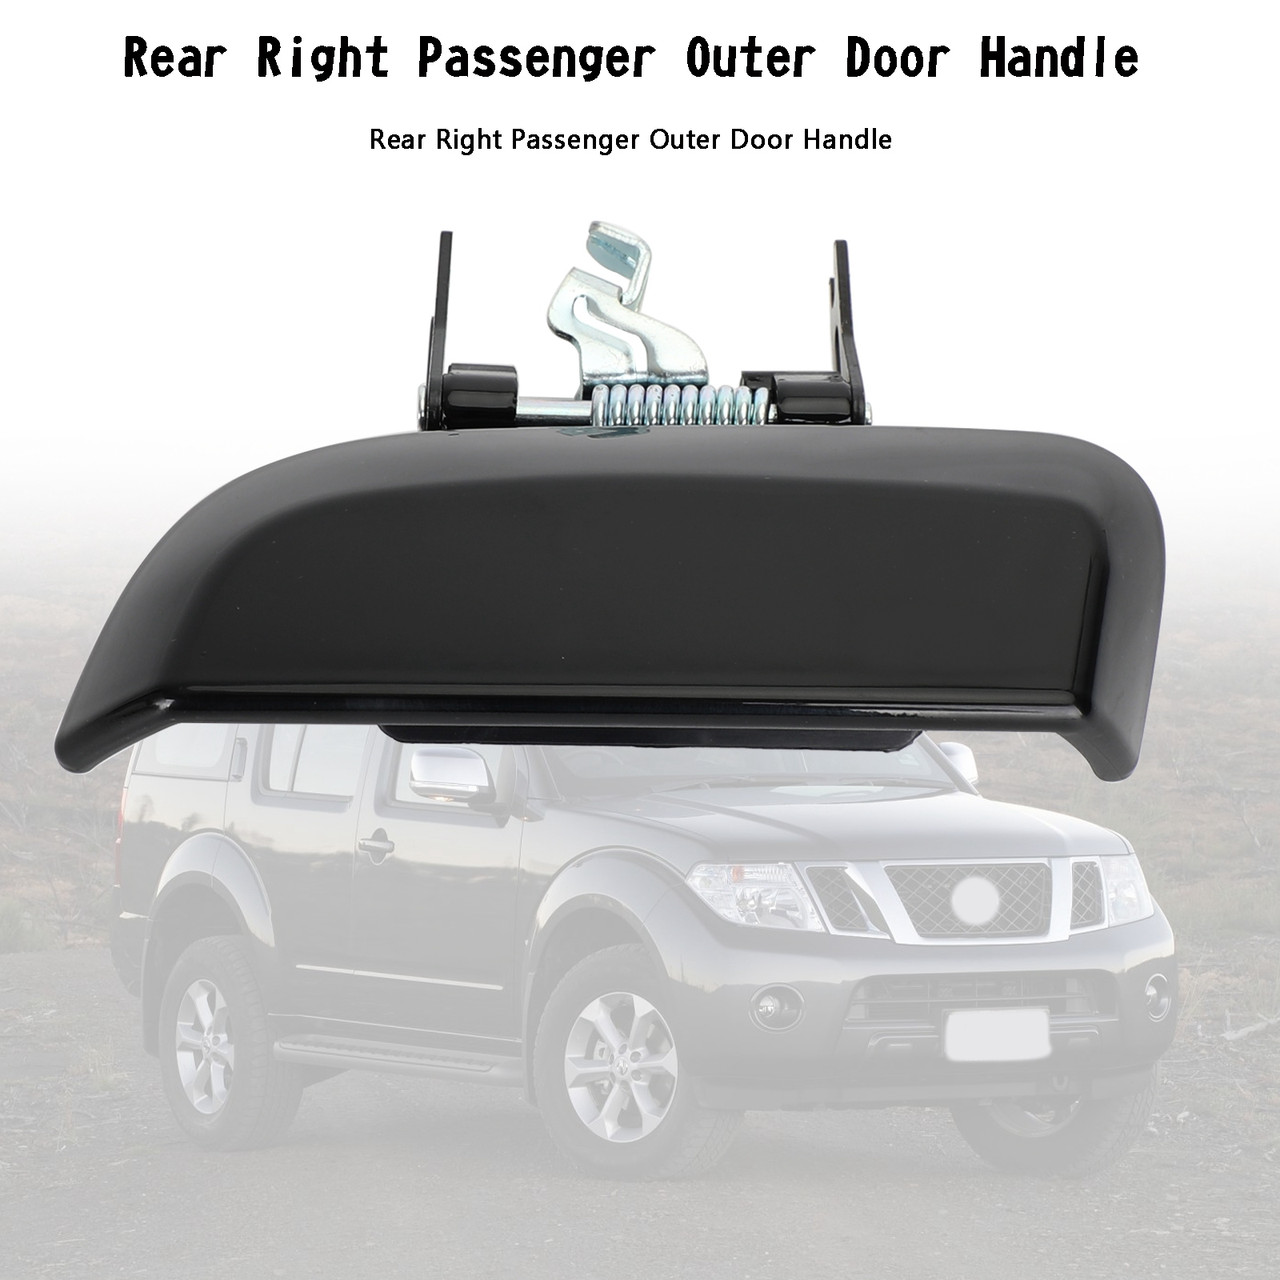 Rear Right Passenger Outer Door Handle For Nissan Pathfinder R51 2005-2012